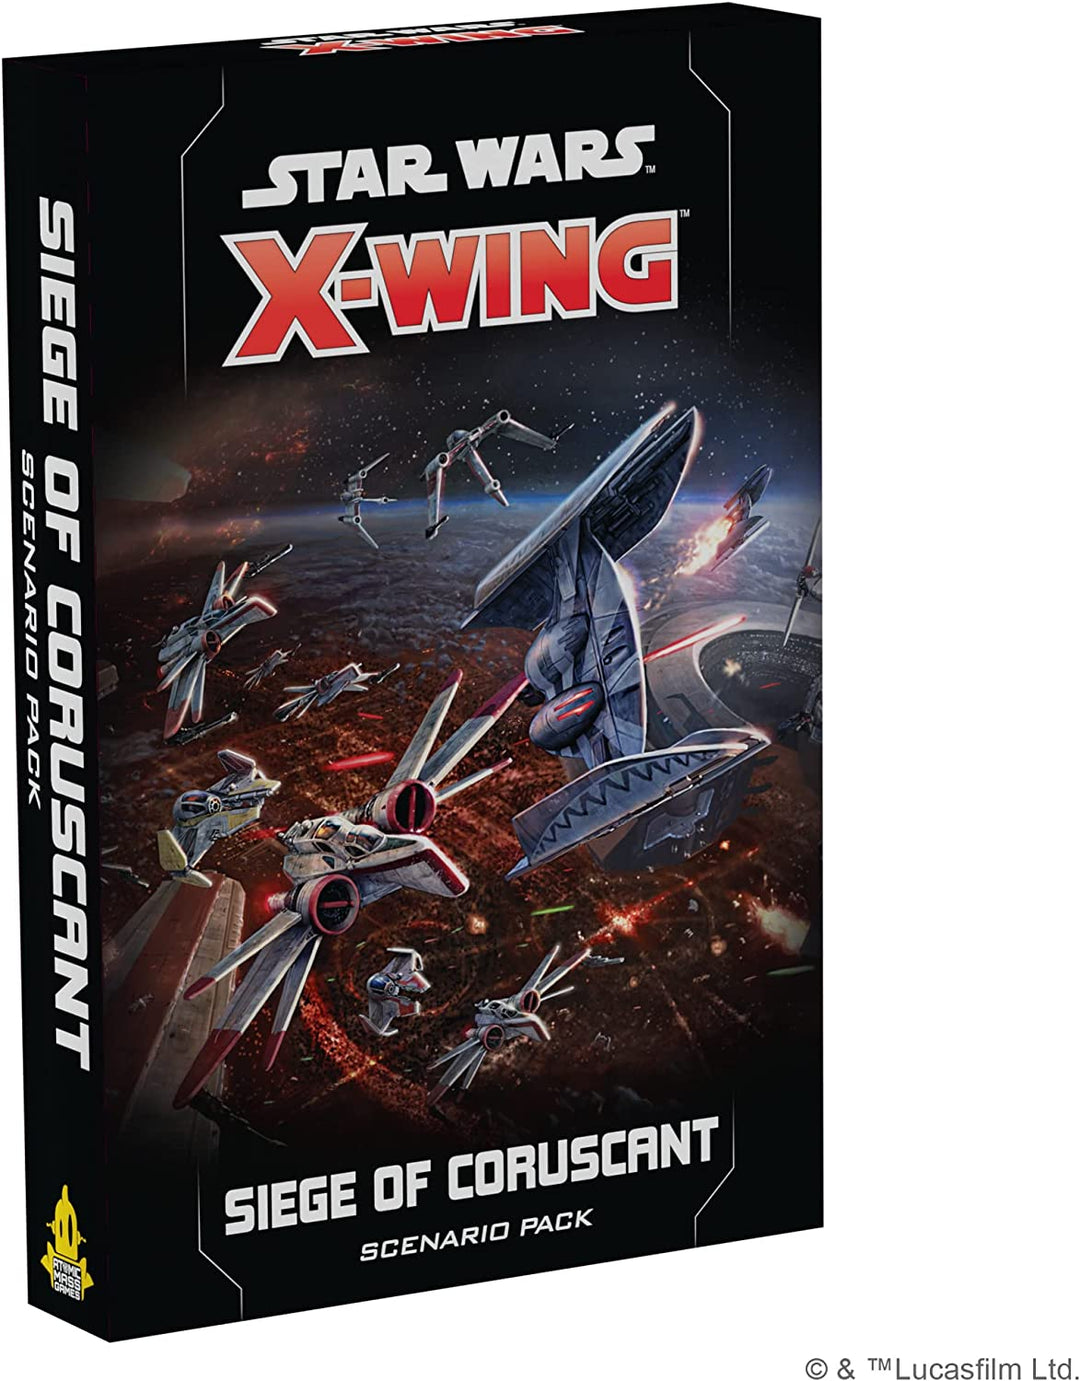 Star Wars: X-Wing - Siege Of Coruscant Scenario Pack